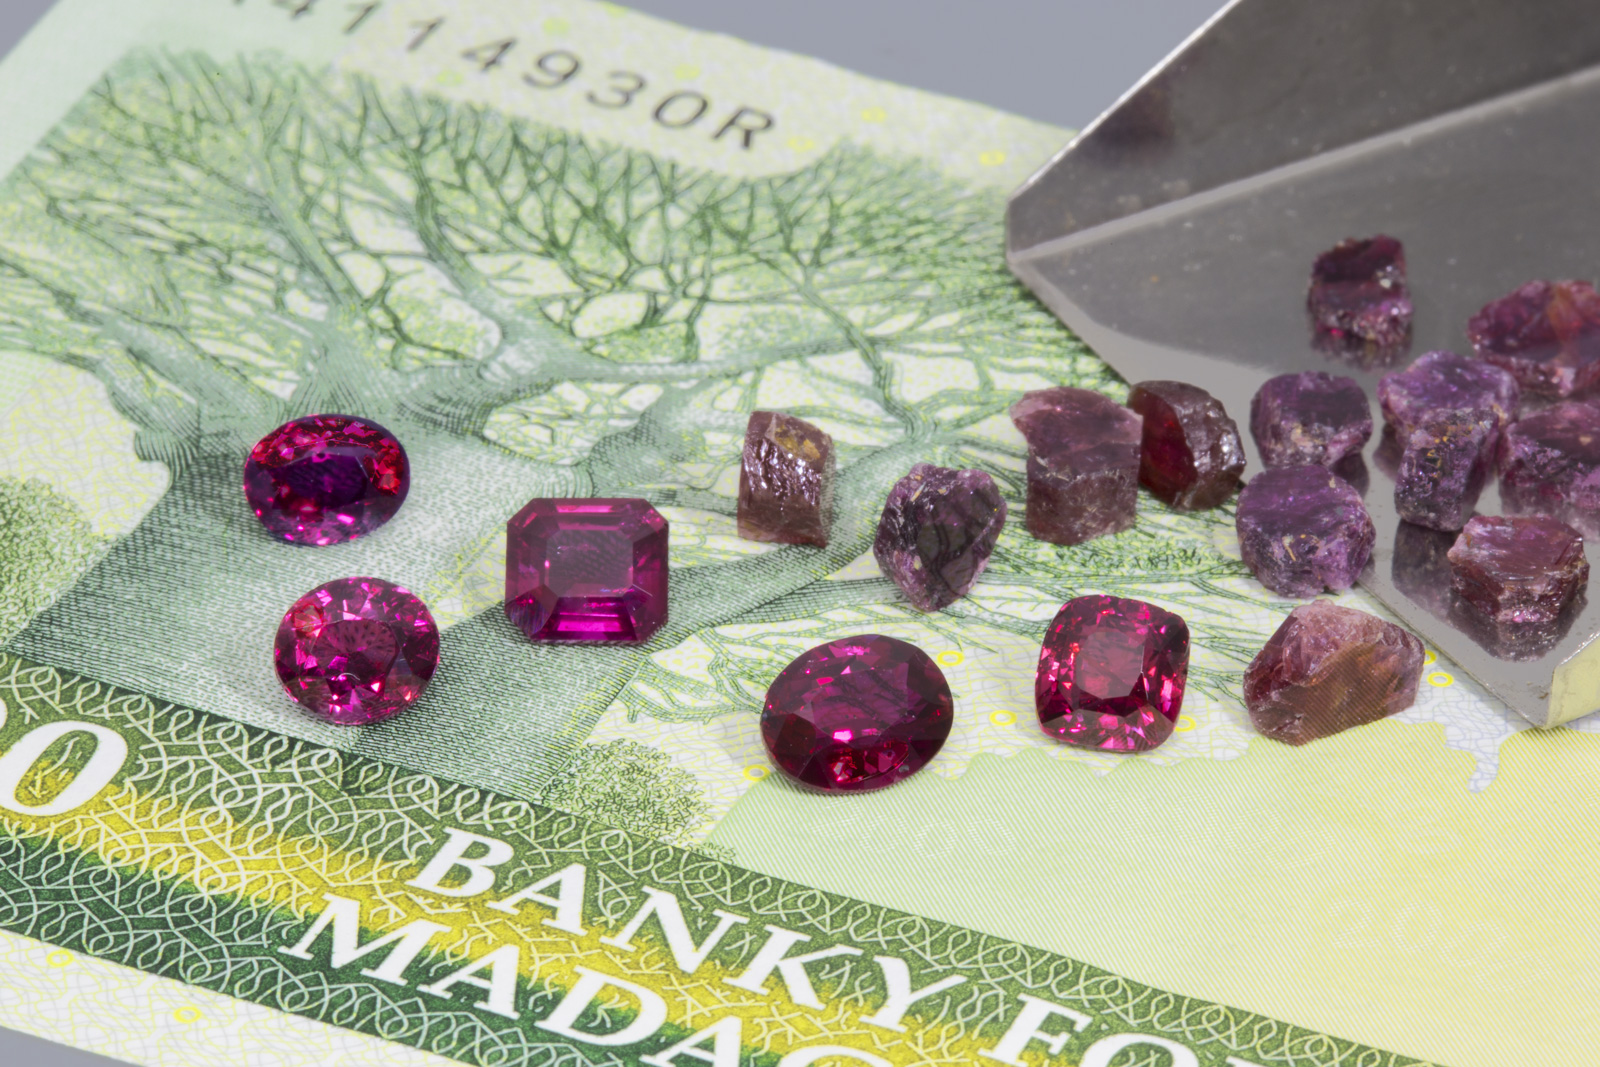 Faceted Madagasar rubies from the 2015 find, along with rough rubies from Moramanga collected by the author in 2005. The faceted stones are between 1.2 and 1.3 ct each. Photo: Wimon Manorotkul/Lotus Gemology.